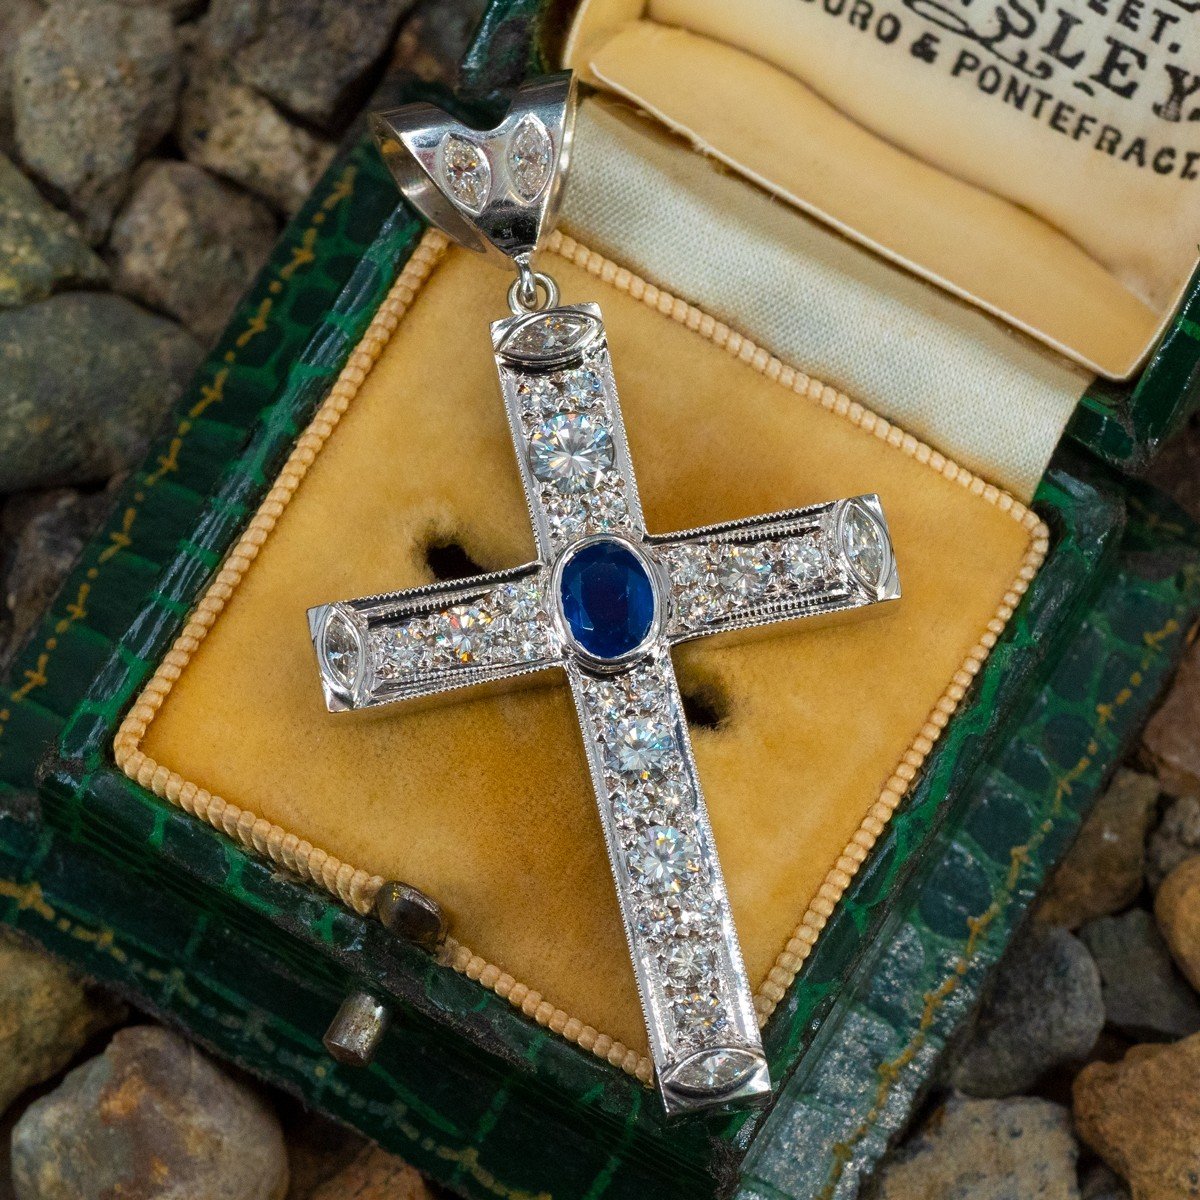 Cross Pendant Necklace With The Lord's Prayer Centrepiece